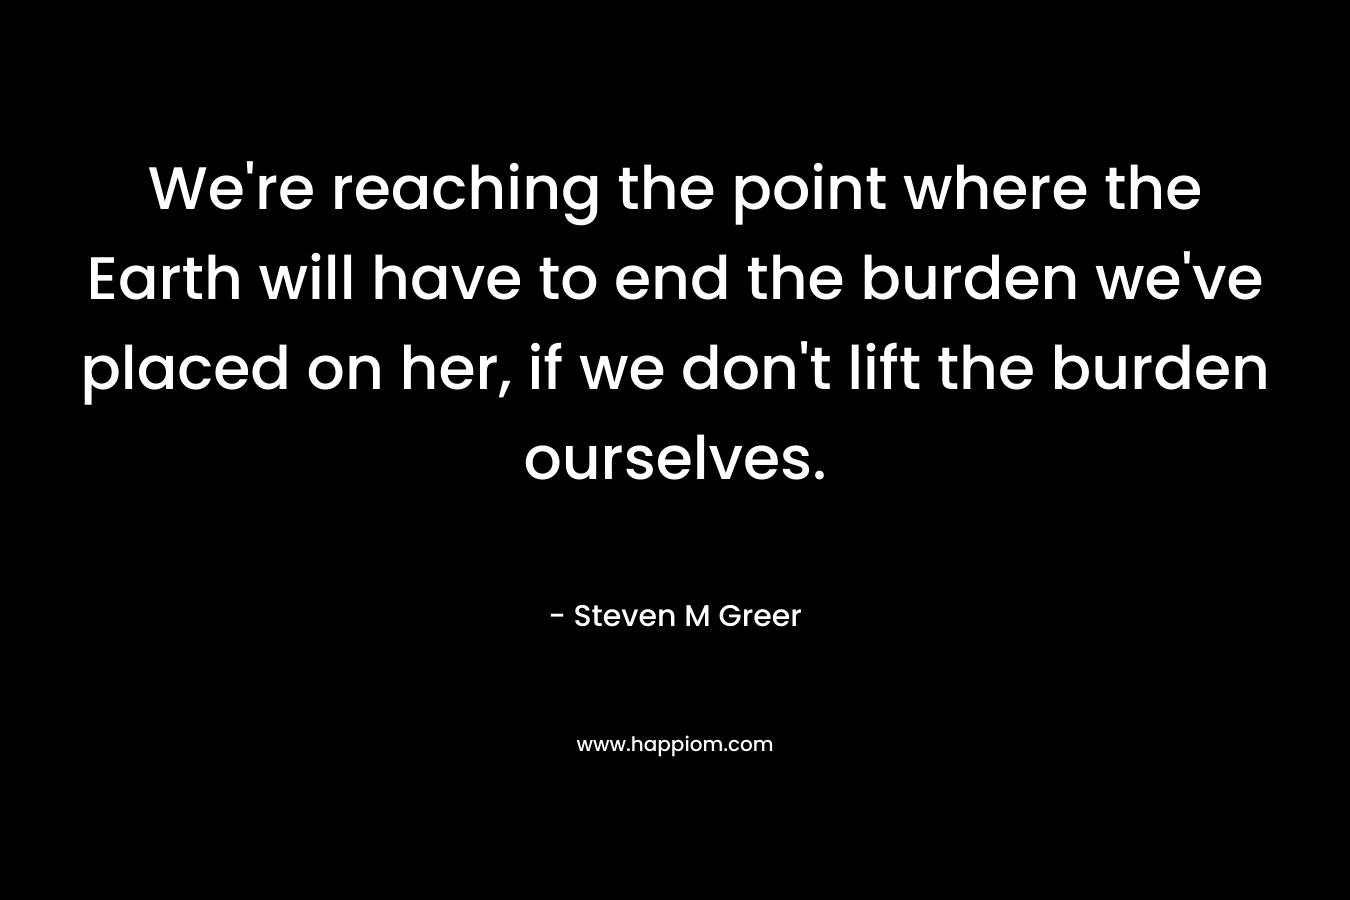 We’re reaching the point where the Earth will have to end the burden we’ve placed on her, if we don’t lift the burden ourselves. – Steven M Greer